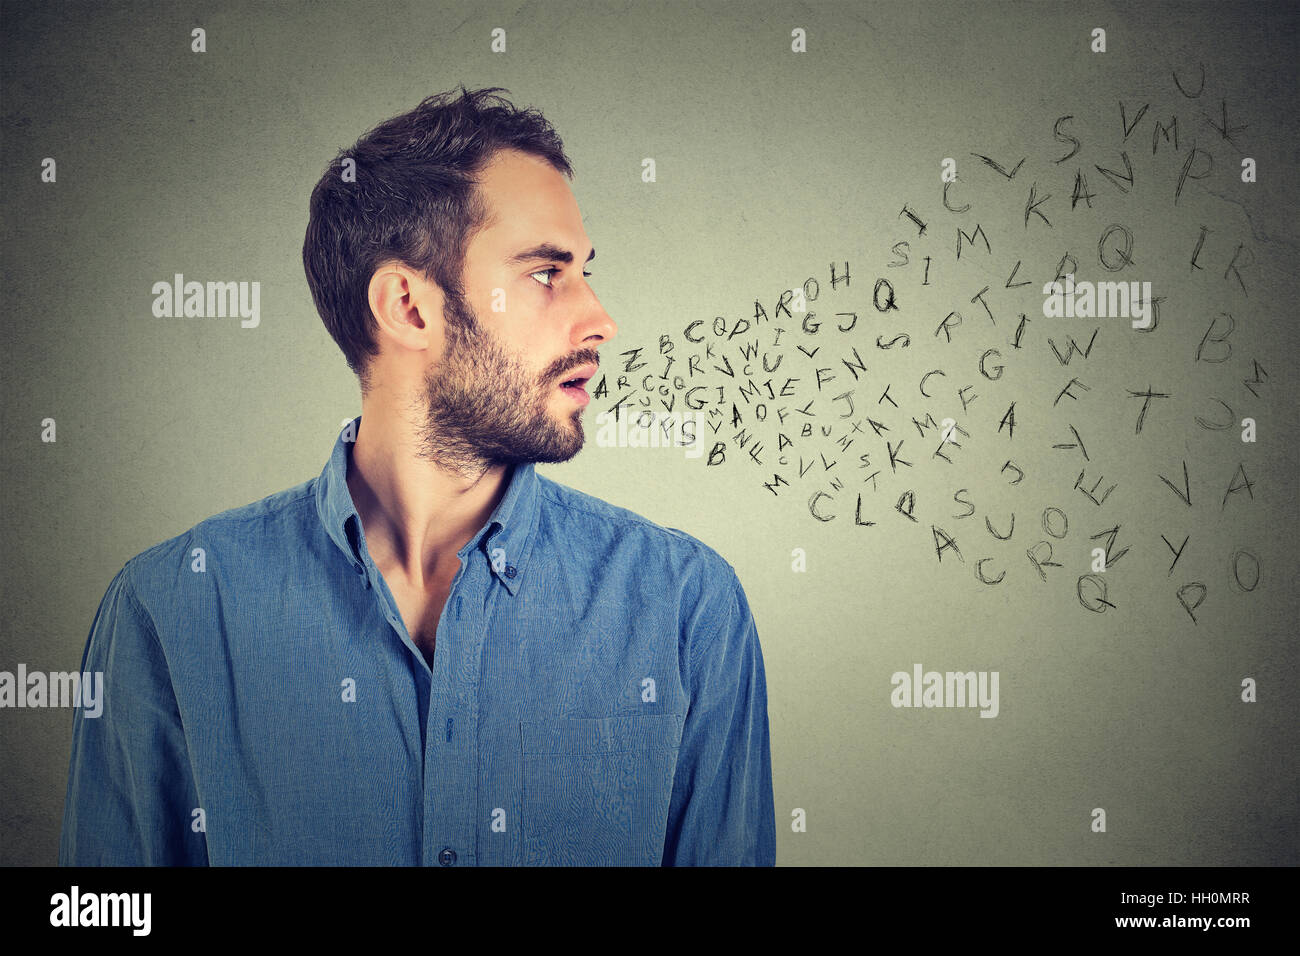 Man talking with alphabet letters coming out of his mouth. Communication, information, intelligence concept Stock Photo